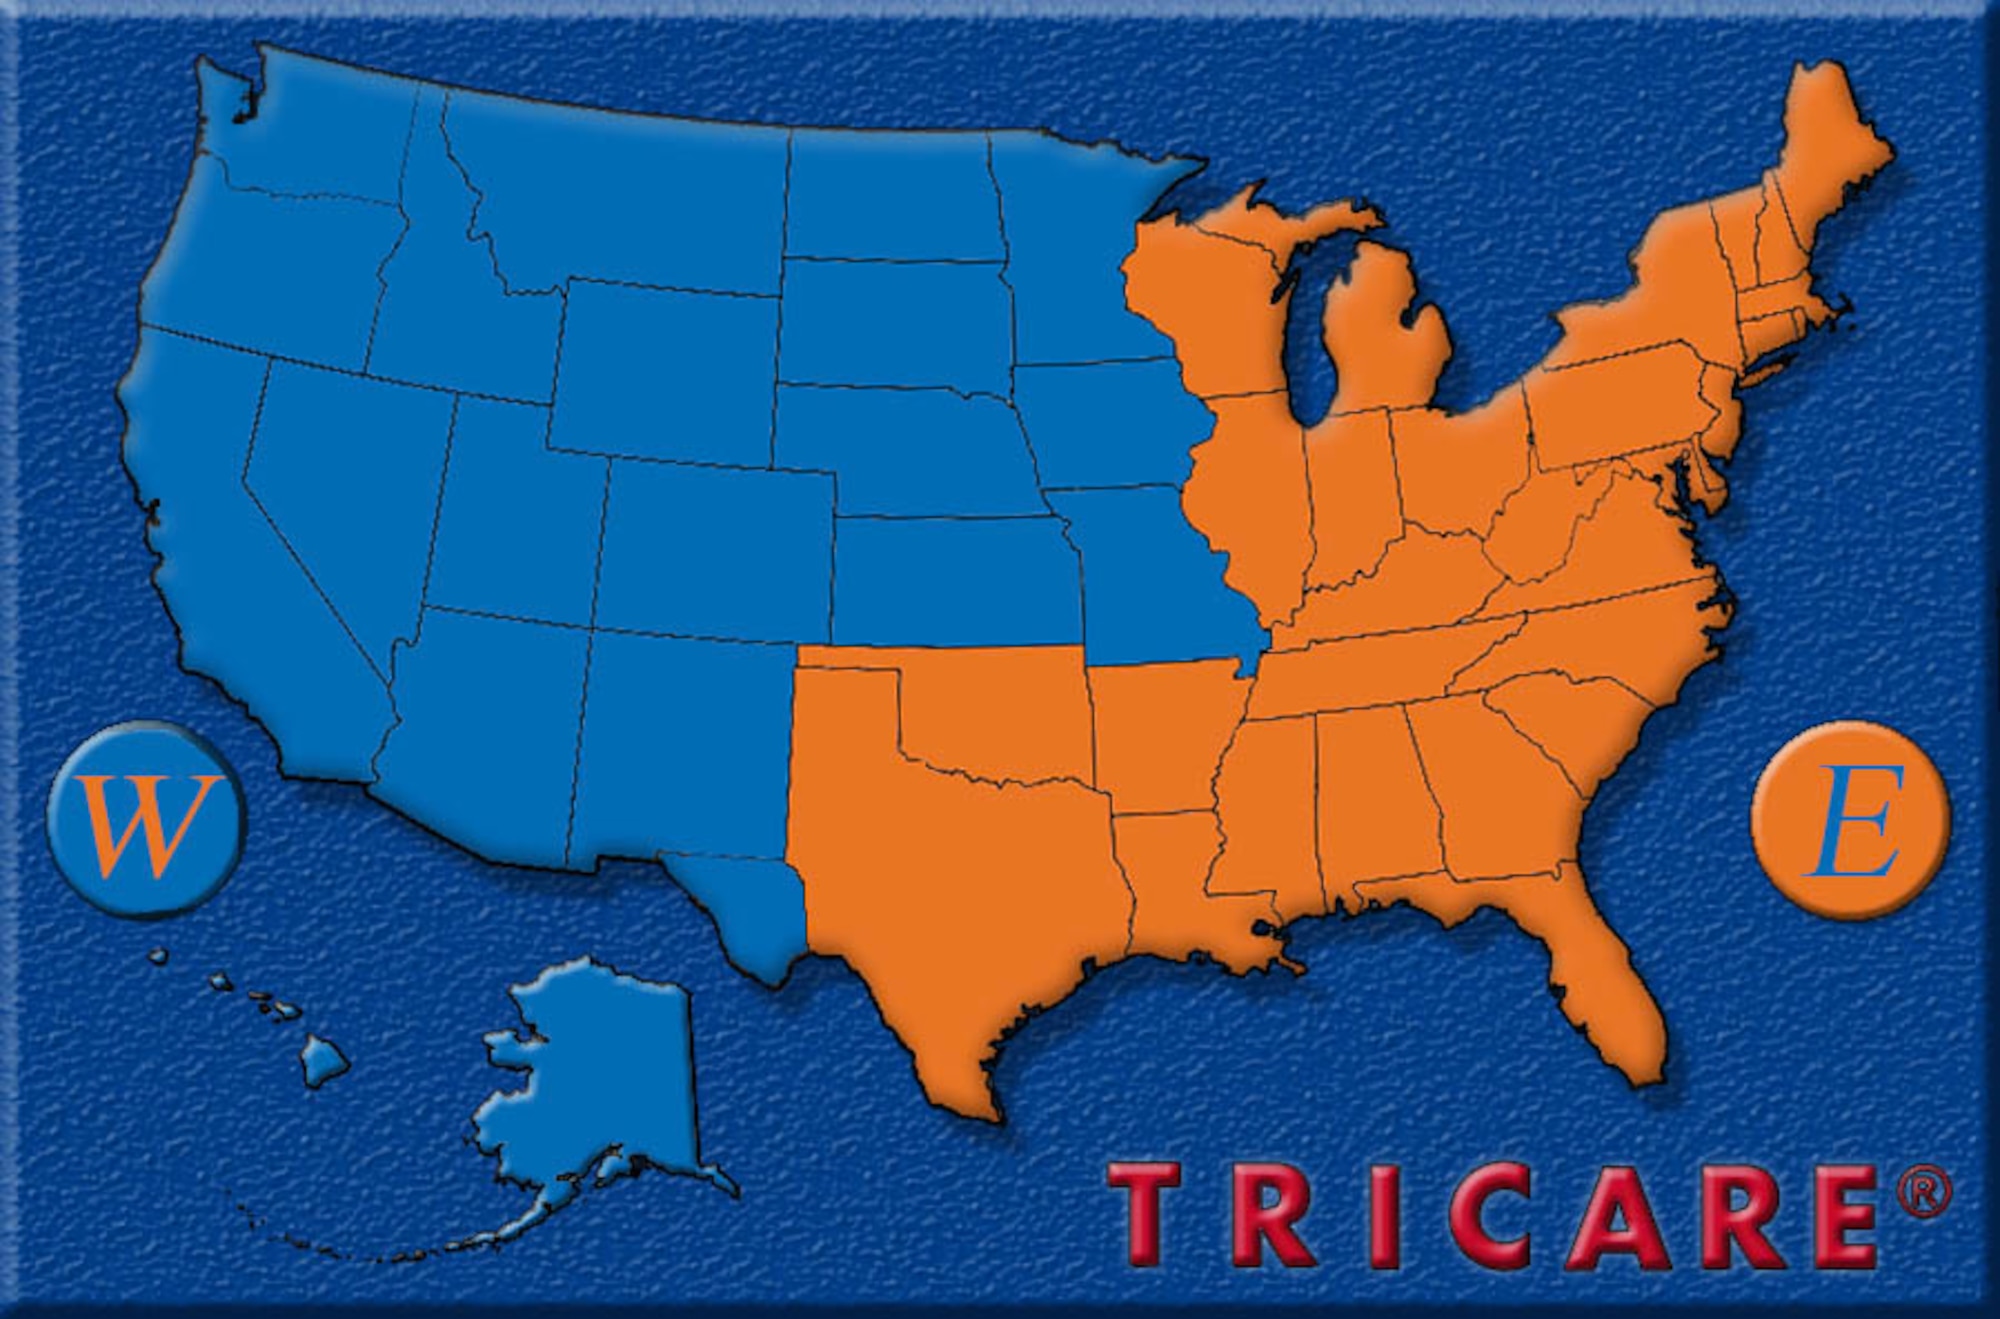 The TRICARE West region is marked in blue and the TRICARE East is marked in orange.